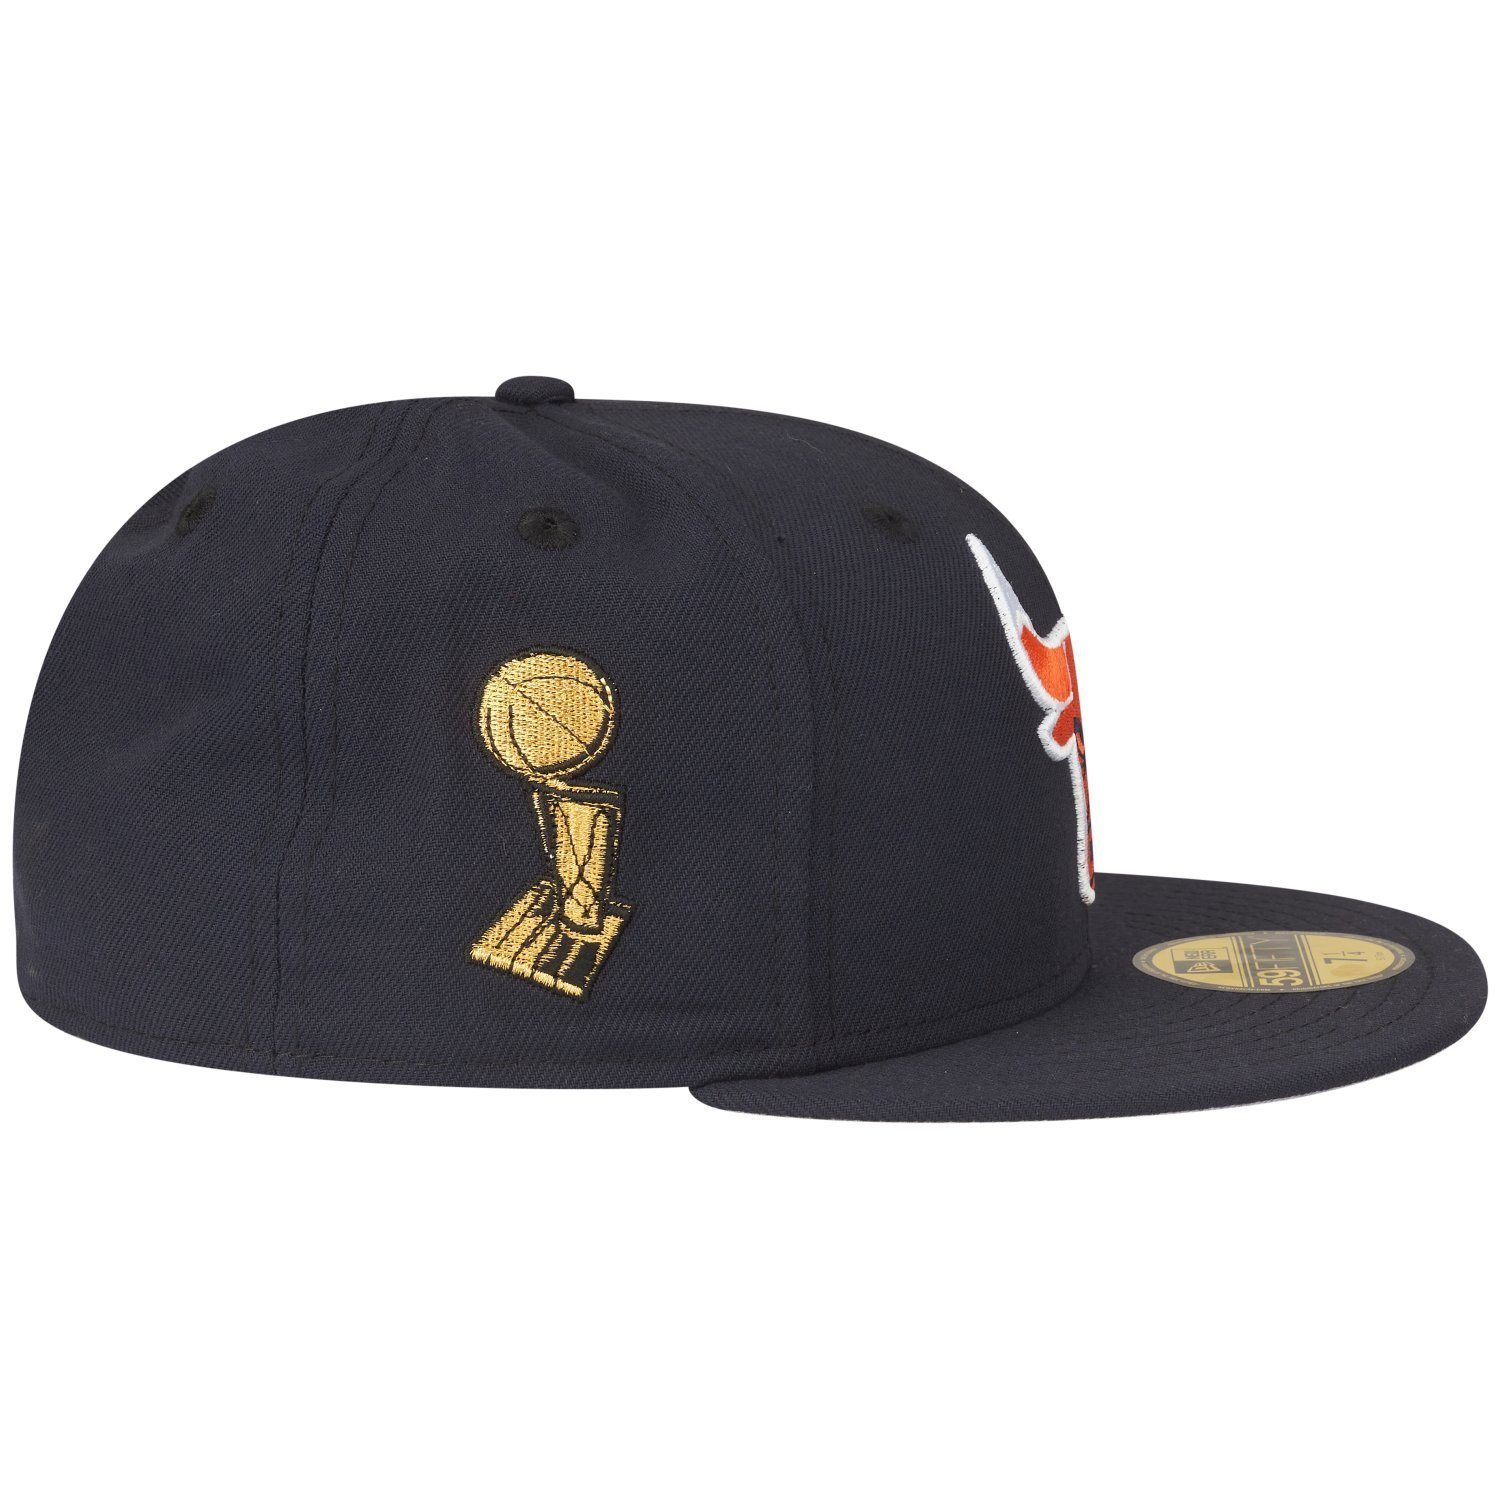 New Fitted Bulls Cap 59Fifty Era Chicago CHAMPS